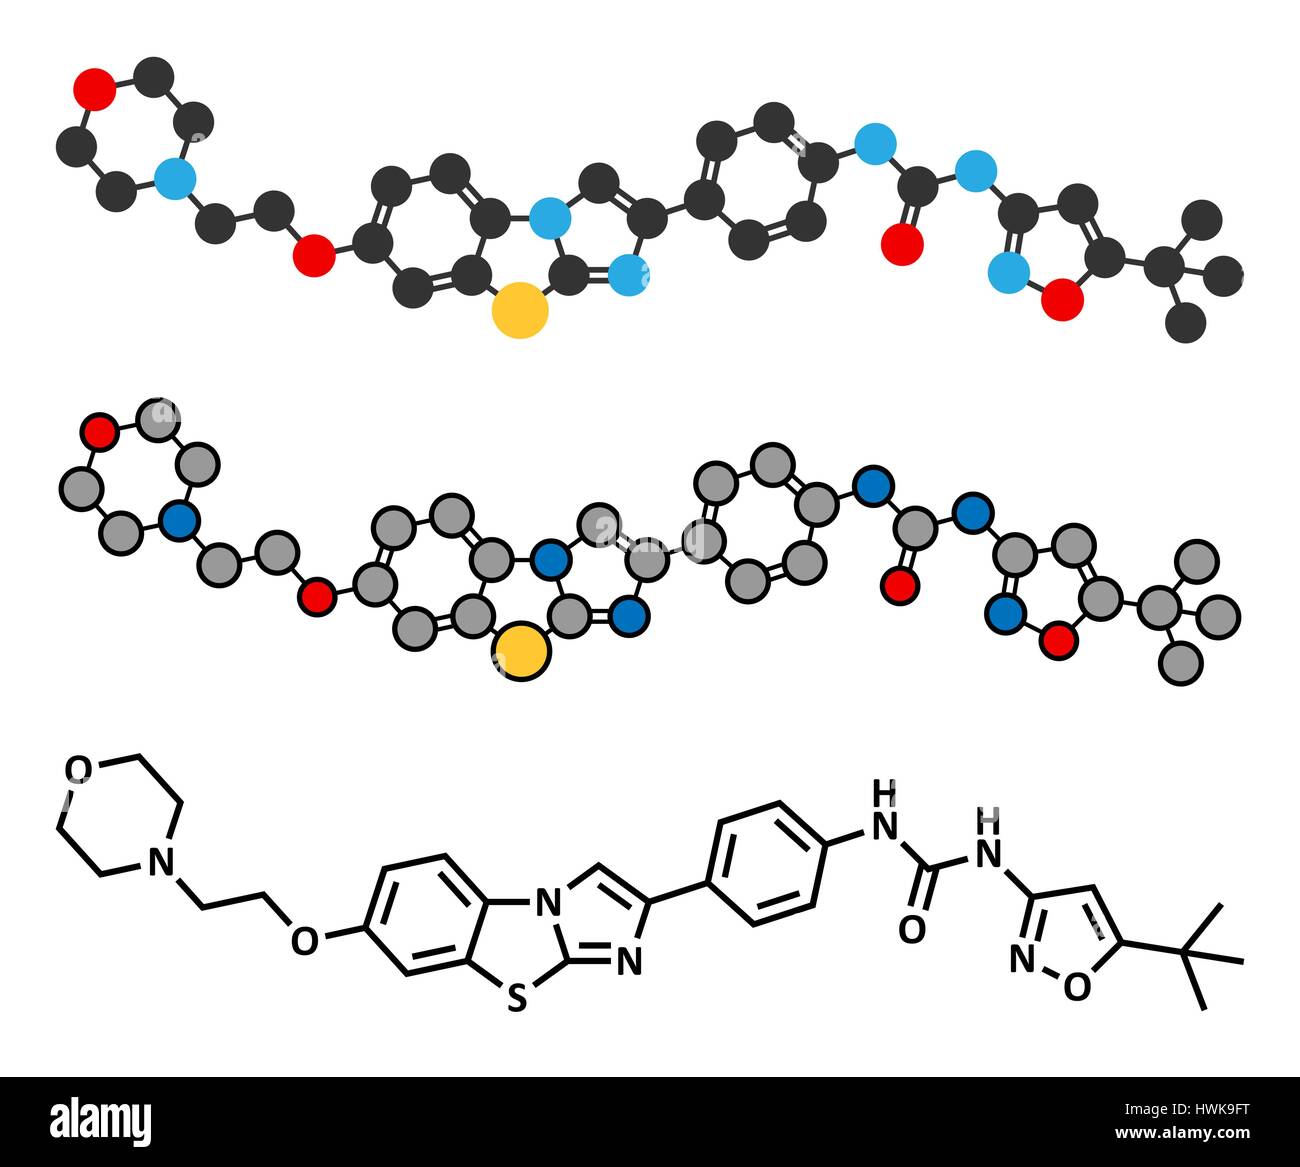 Quizartinib cancer drug molecule (kinase inhibitor). Stylized 2D renderings and conventional skeletal formula. Stock Vector